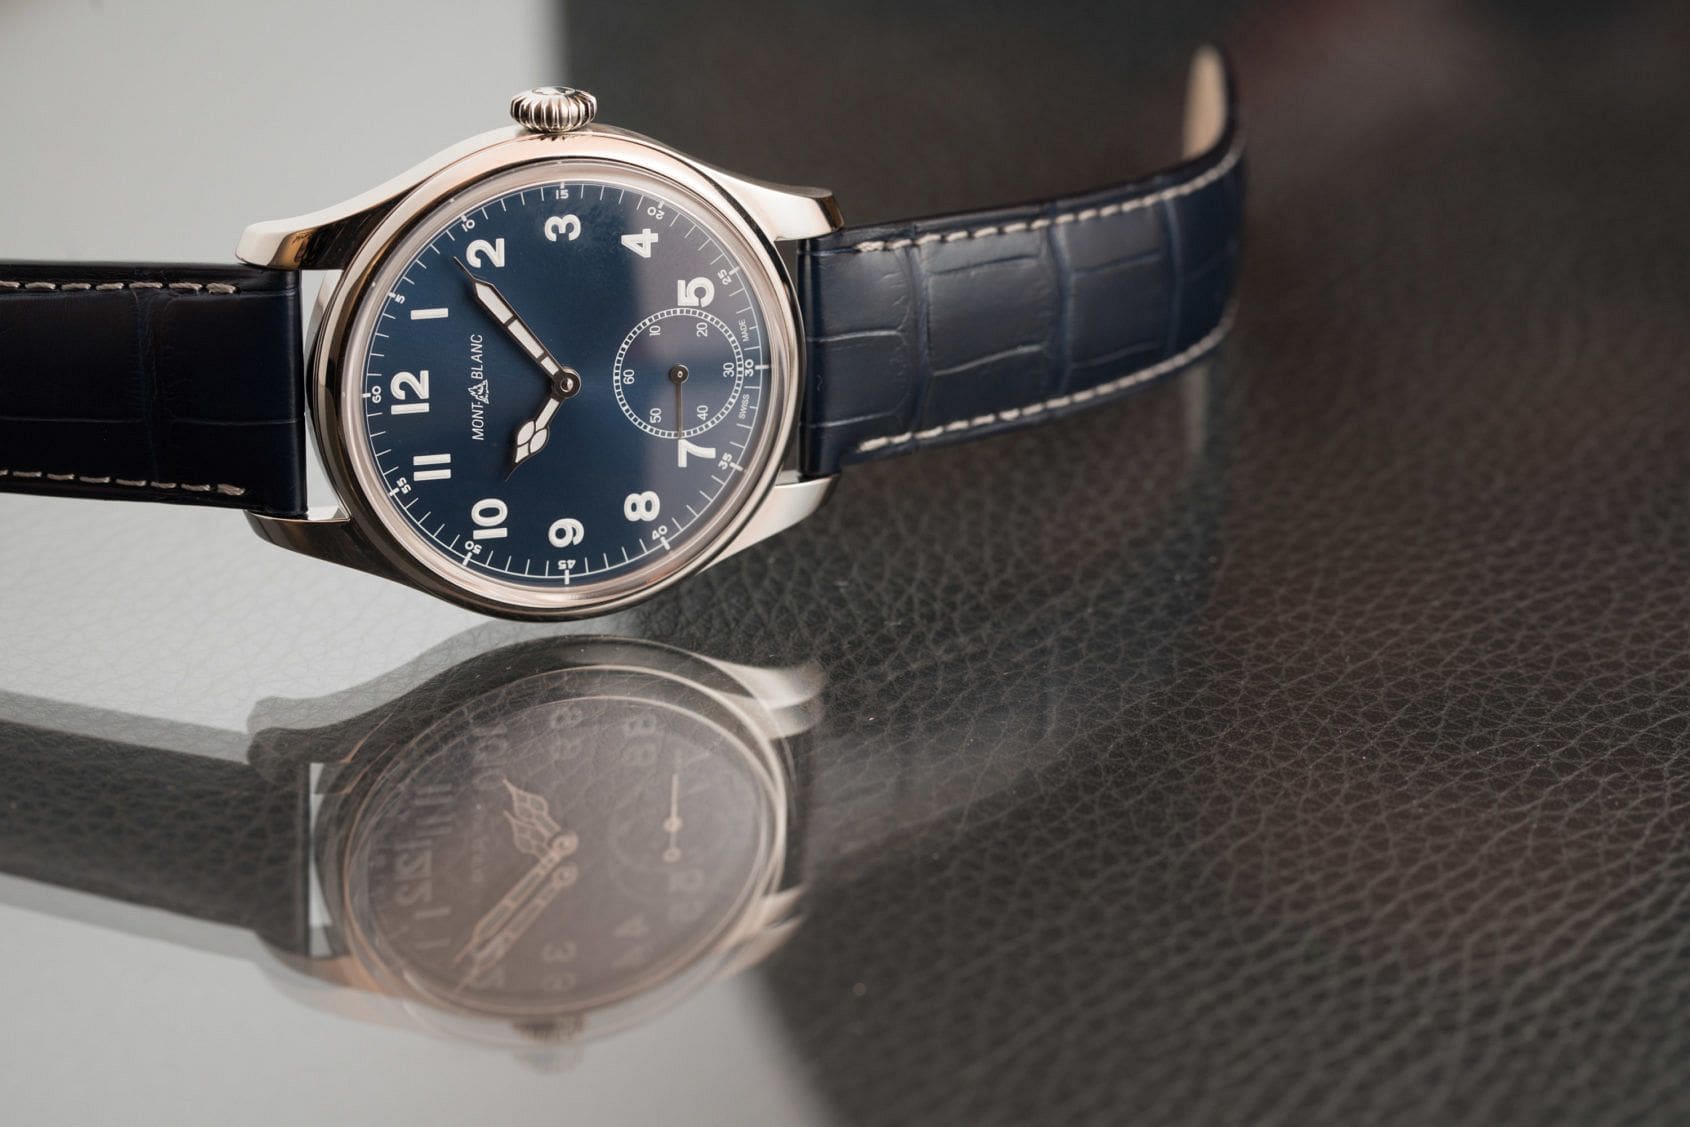 EDITOR’S PICK: Our video review of the Montblanc 1858 Small Second with blue dial